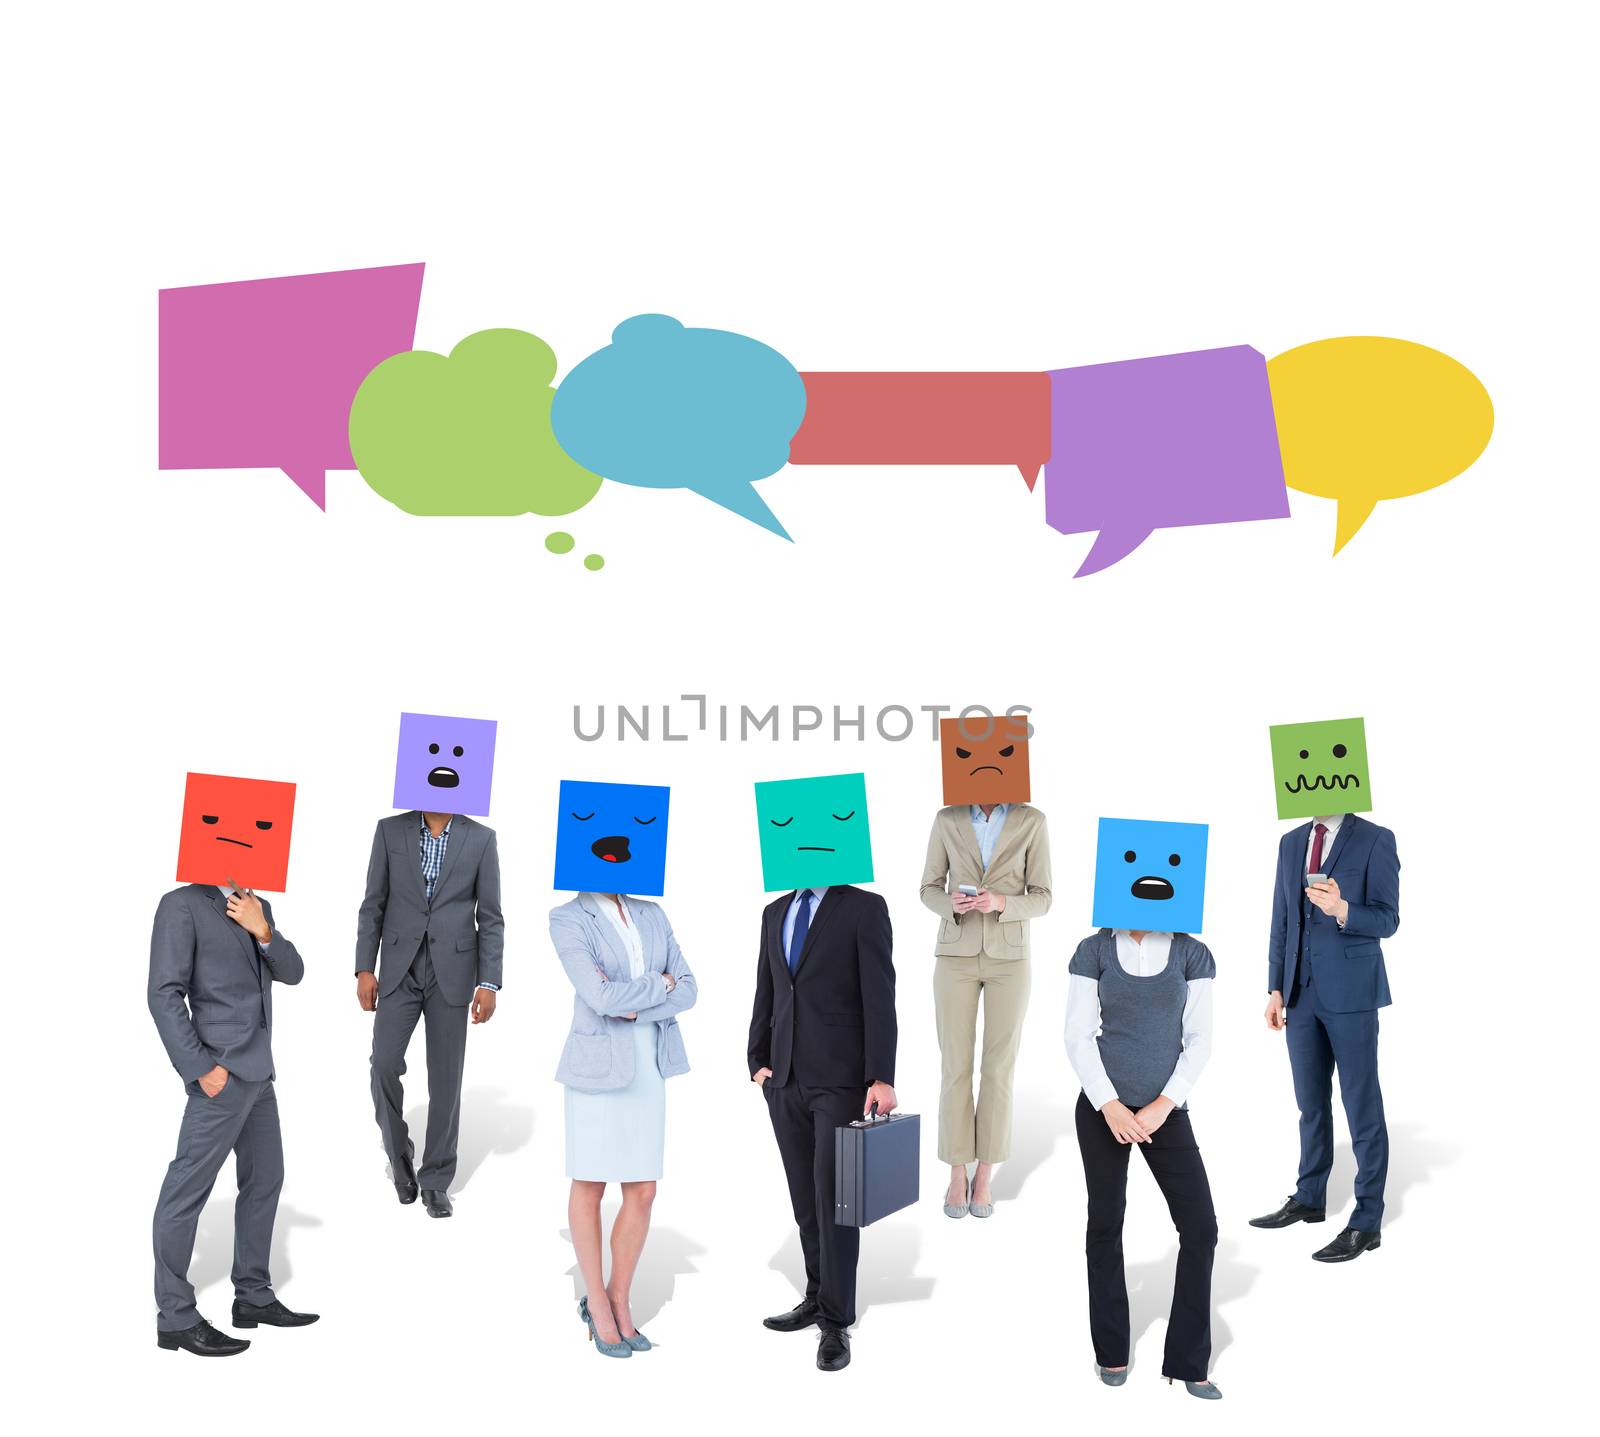 People with boxes on their heads against speech bubbles